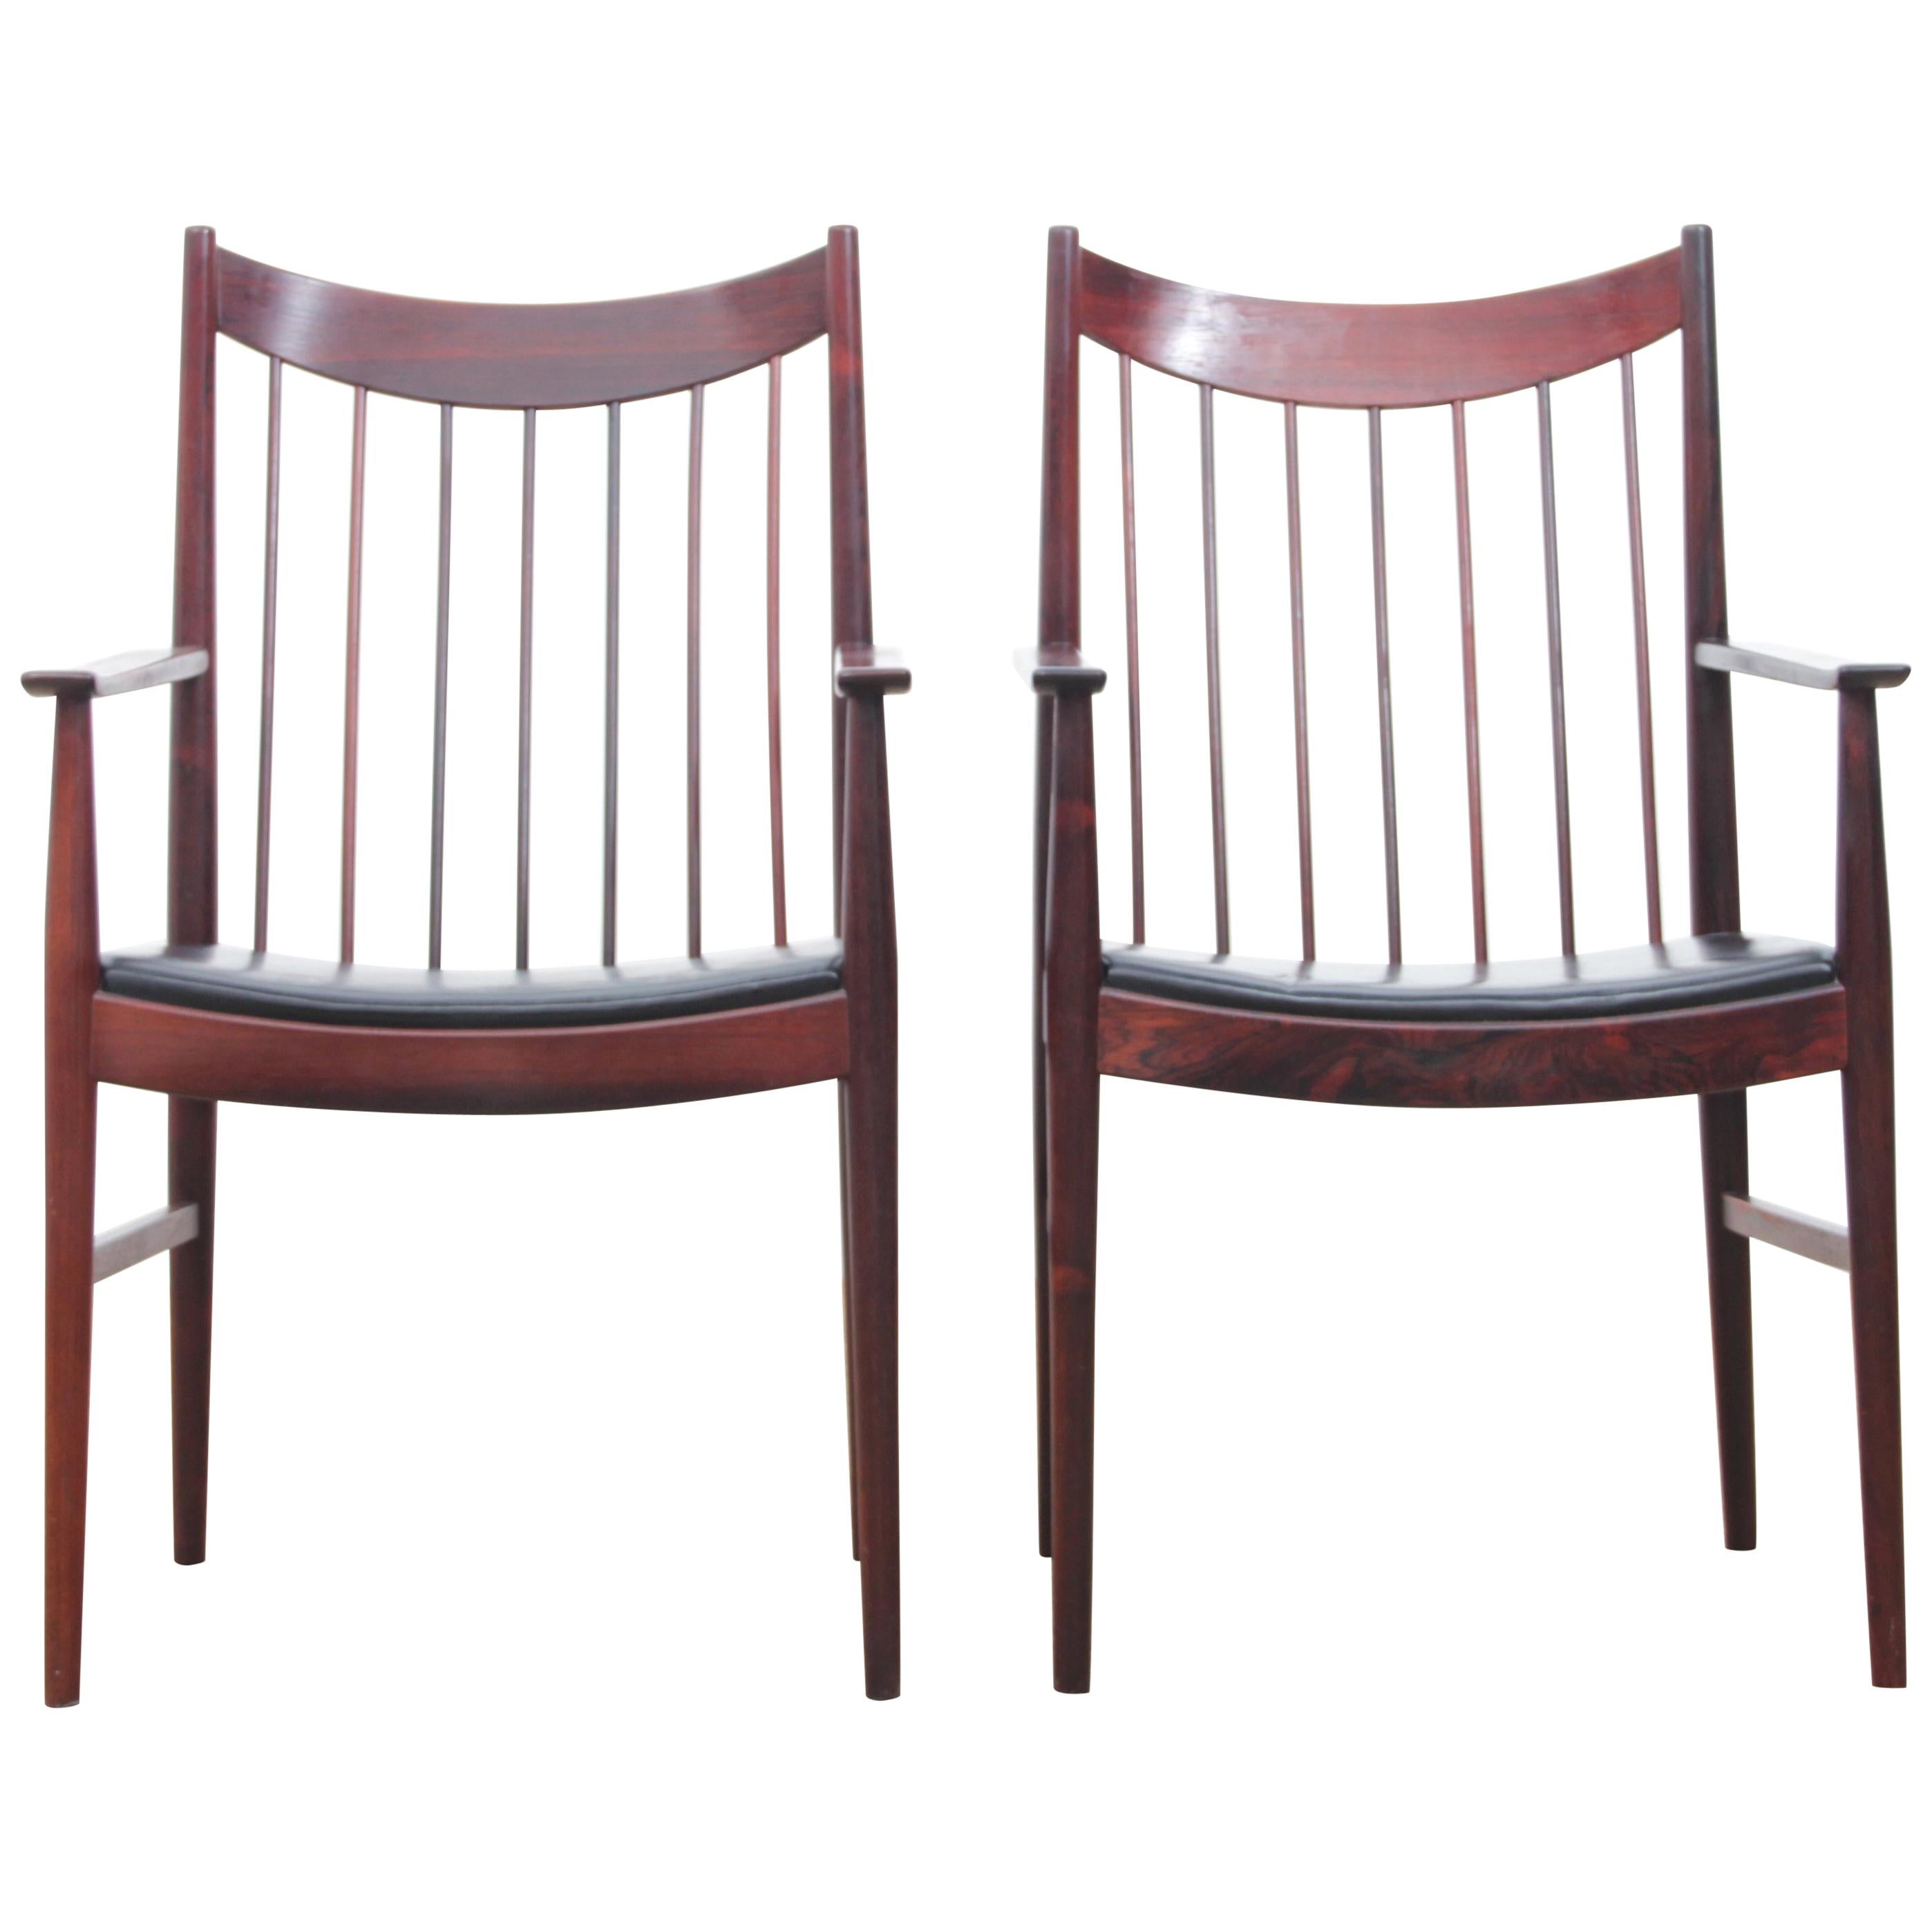 Mid-Century Modern Scandinavian Pair of Armchairs by Arne Vodder For Sale